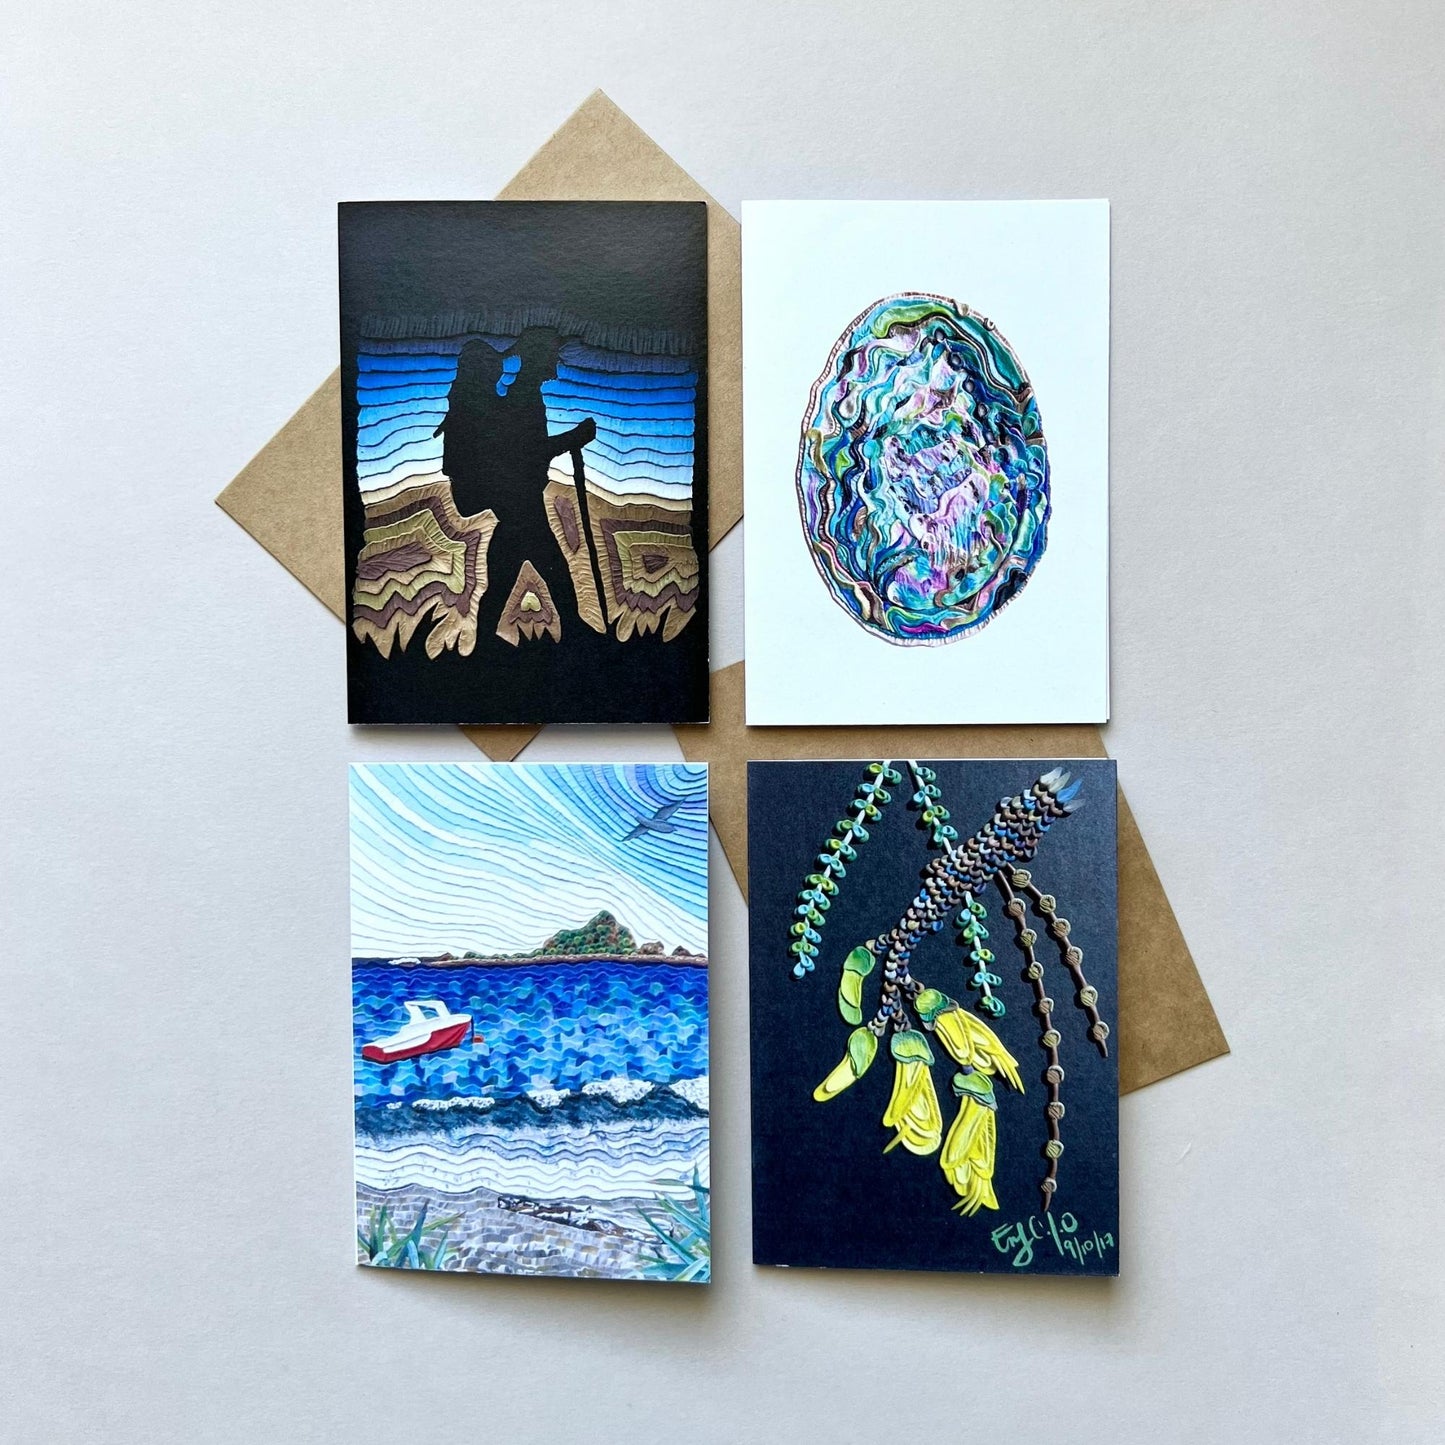 Set of 4 New Zealand themed clay art pieces Reusable Greeting Cards